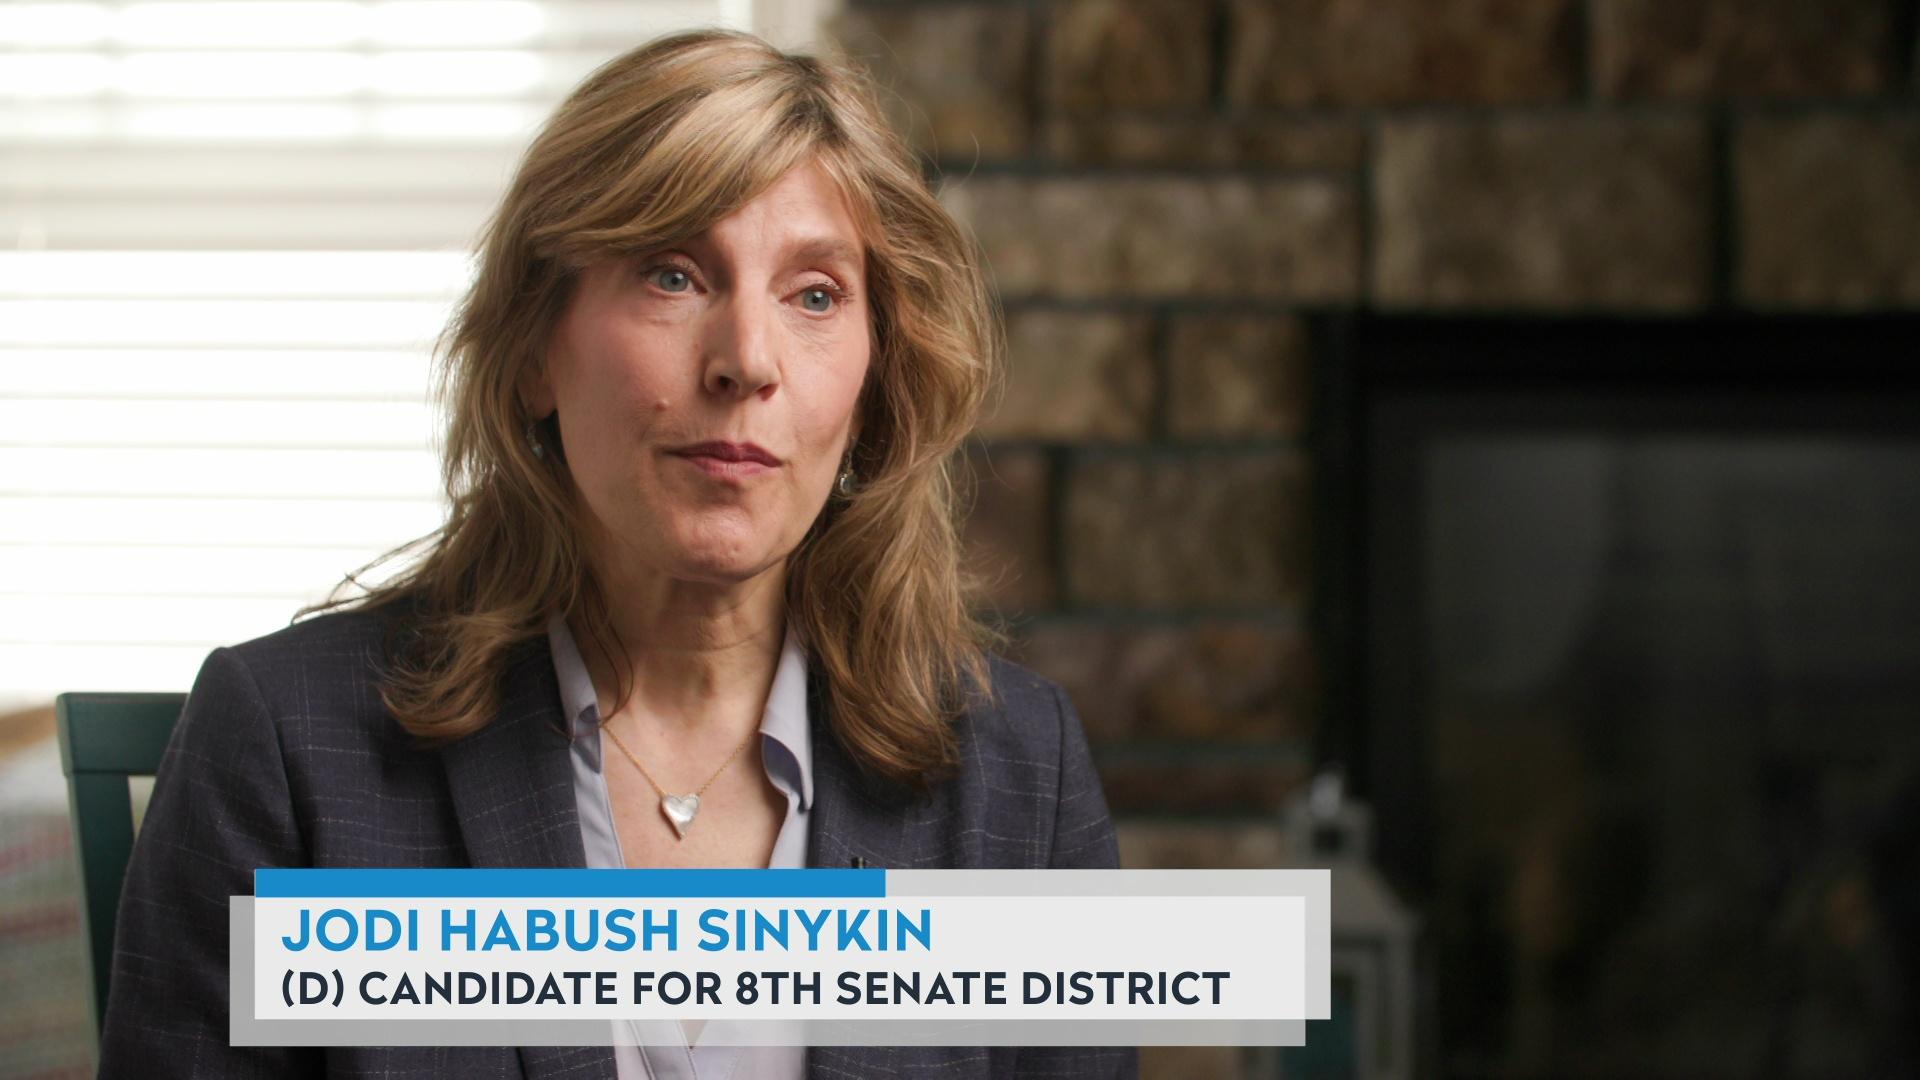 A still image from a video shows Jodi Habush Sinykin sitting in a room with a fireplace and window in the background, with a graphic at bottom reading 'Jodi Habush Sinykin' and '(D) Candidate for 8th Senate District.' 